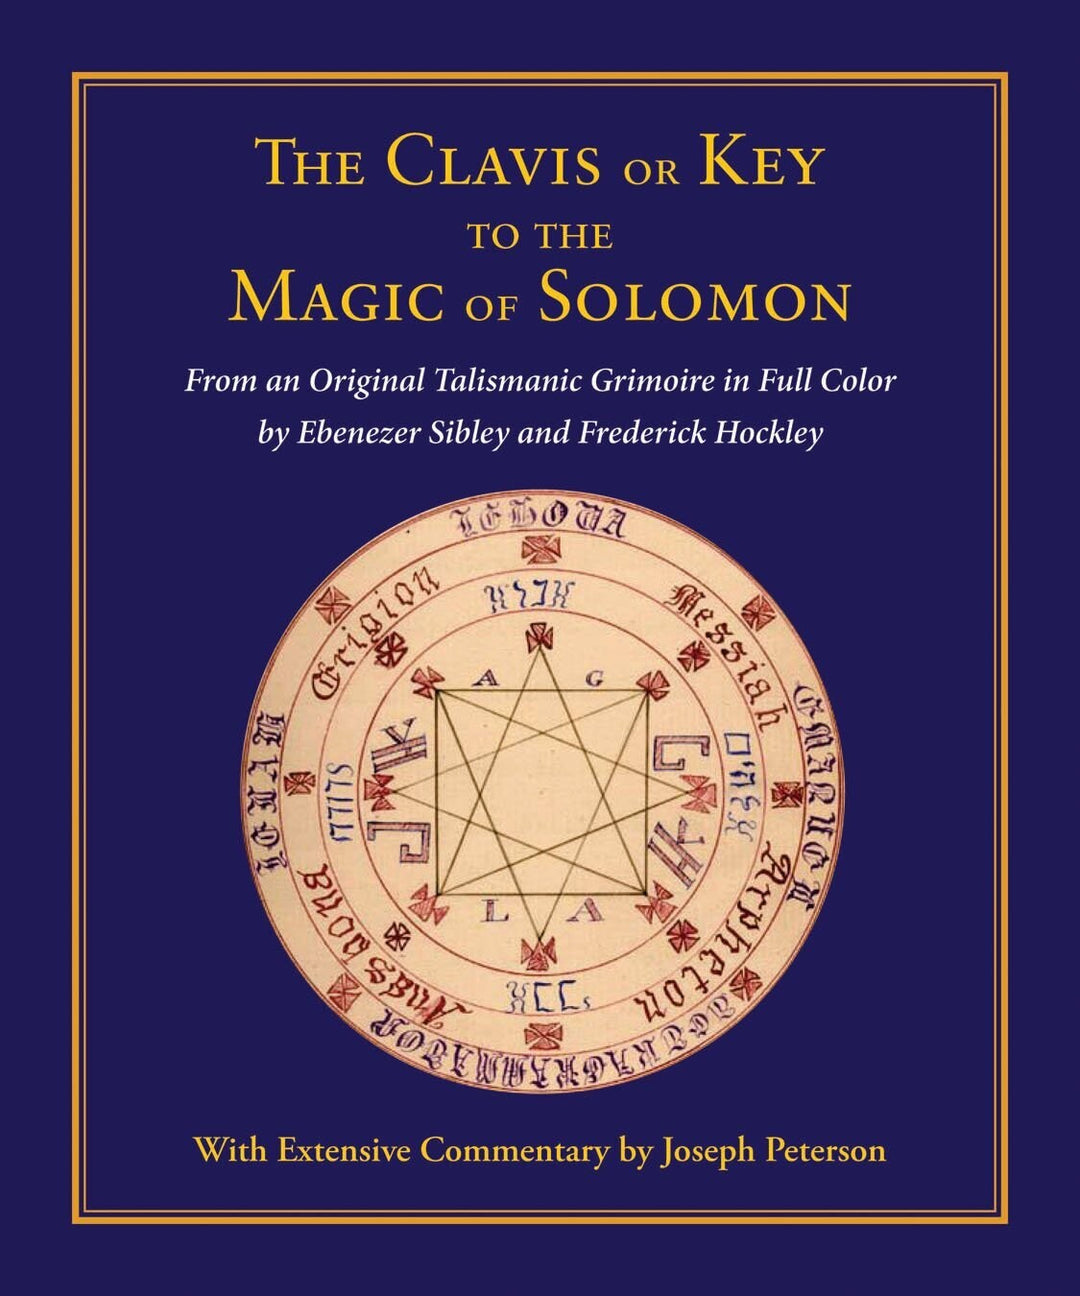 The Clavis or Key to the Magic of Solomon by Joseph Peterson